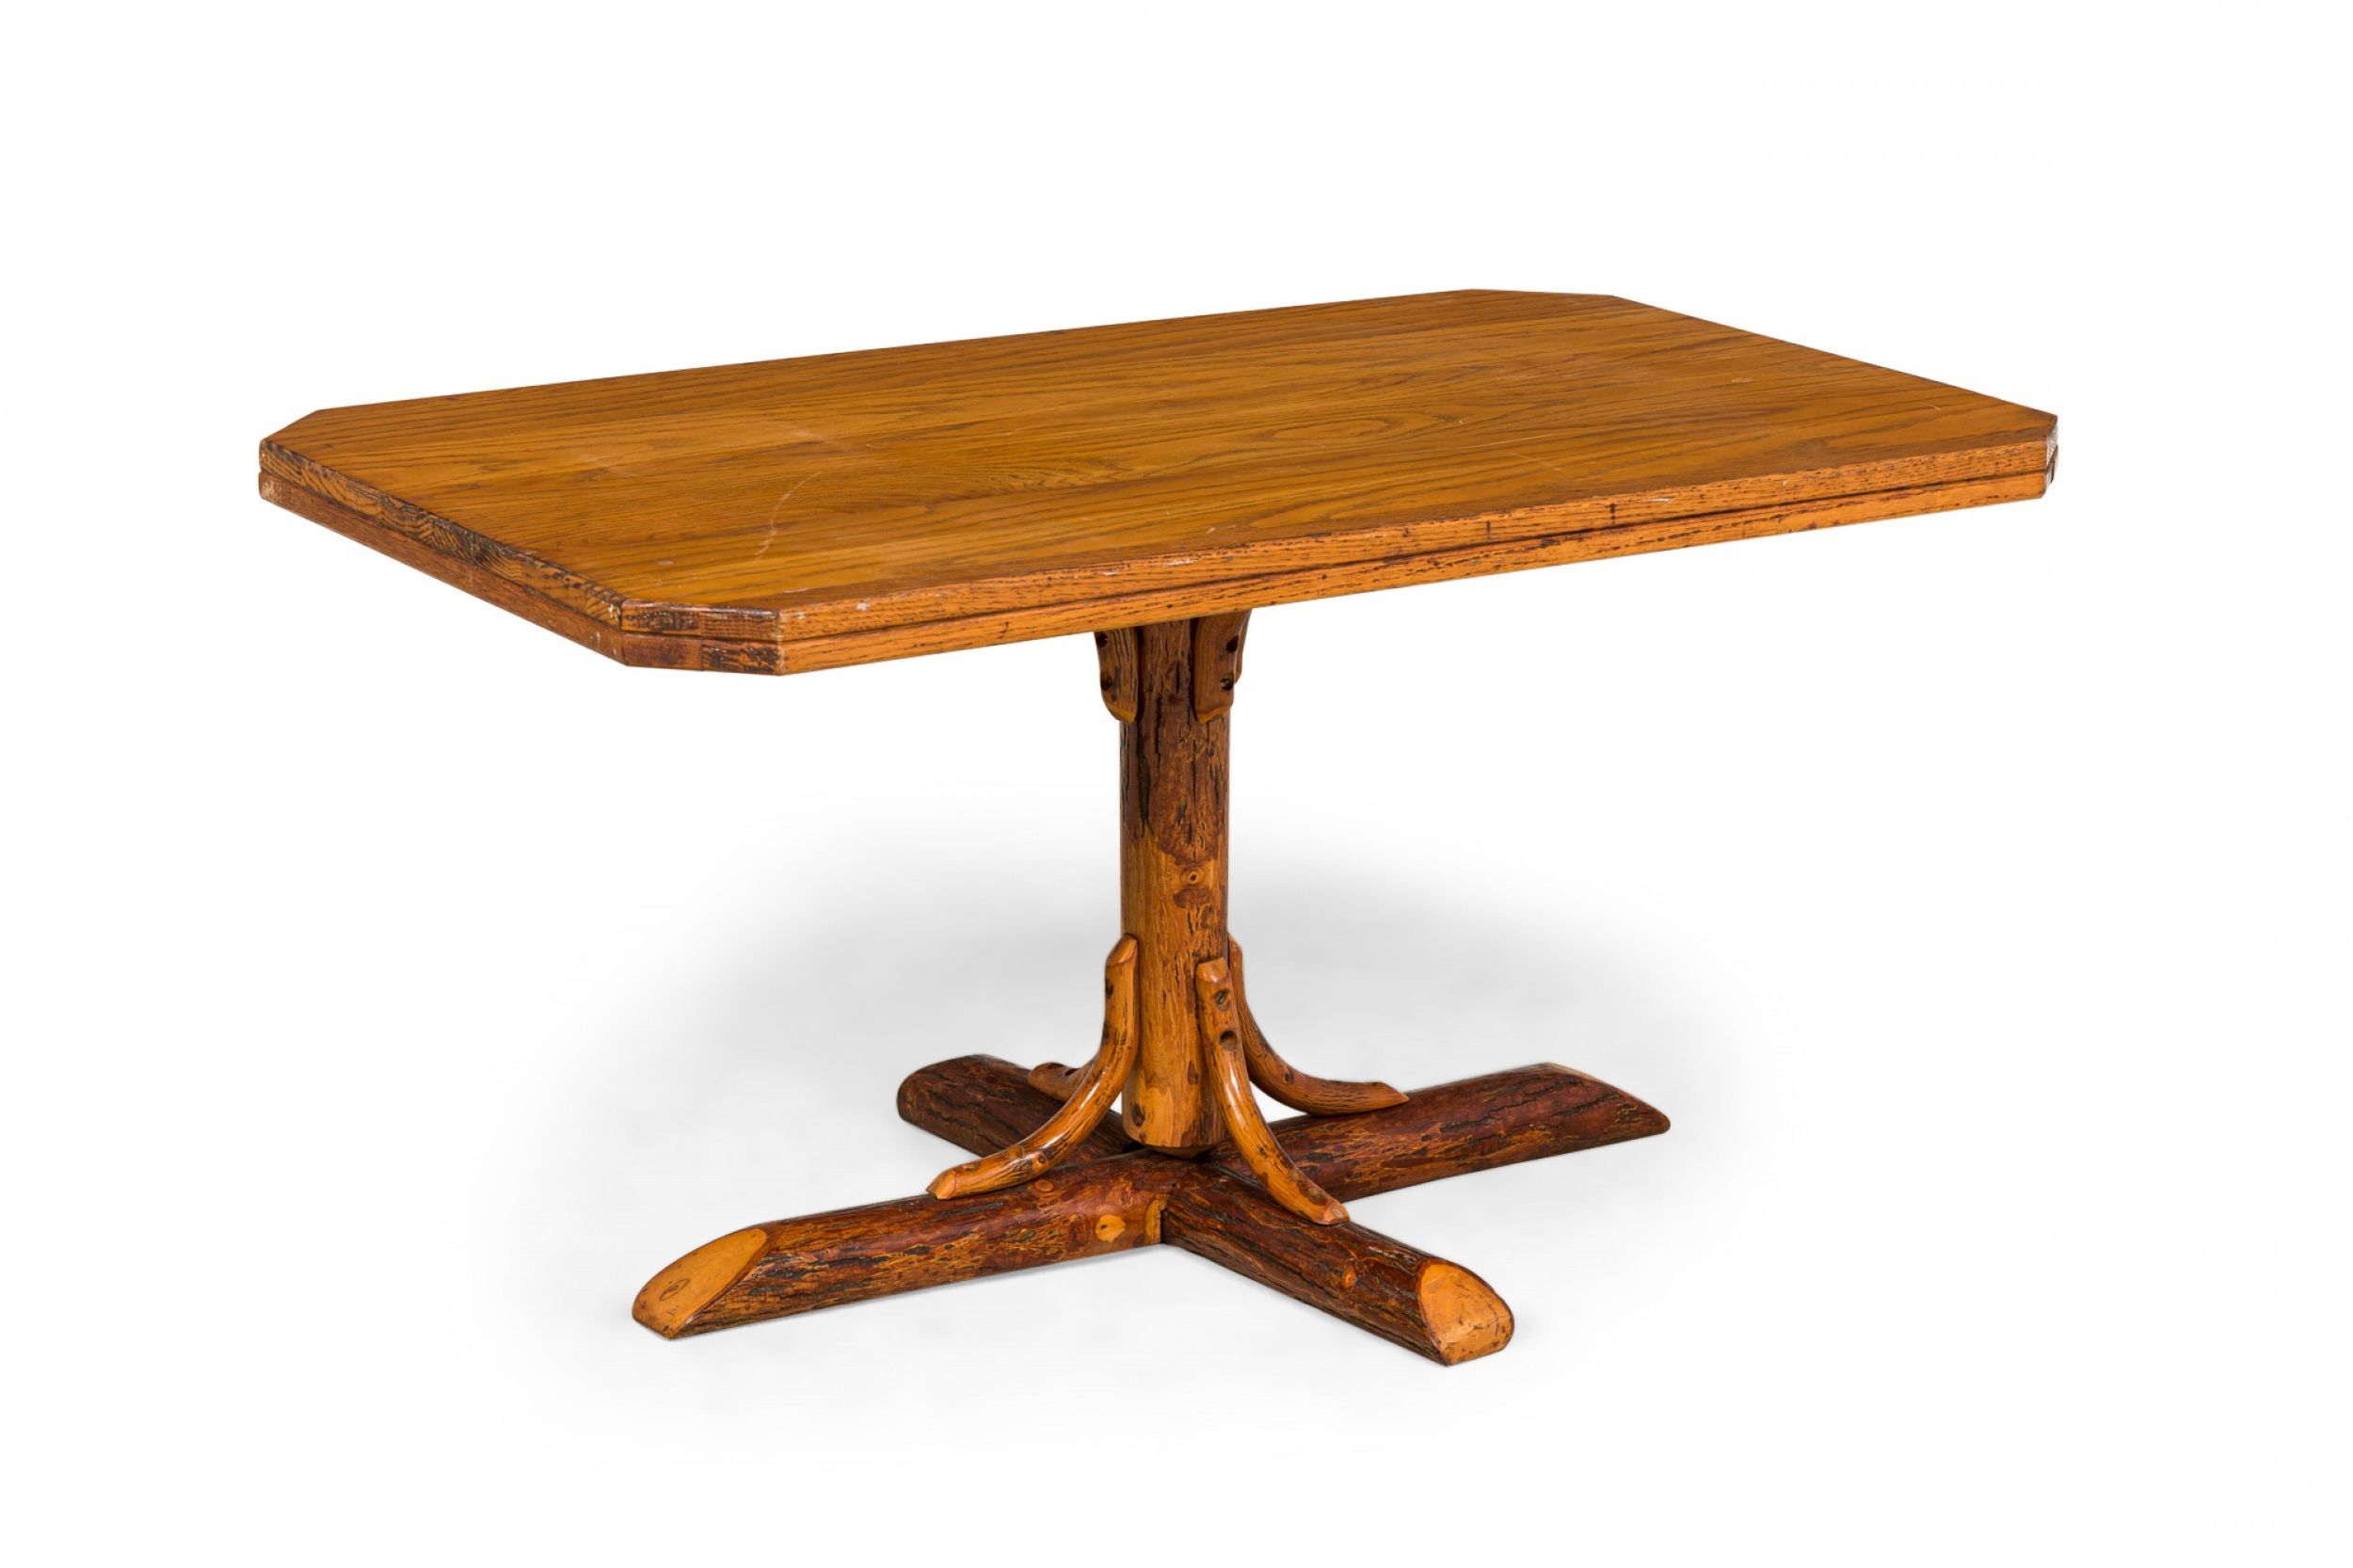 Recent Rectangular Coffee Tables With Pedestal Bases In Rustic Old Hickory Wooden Pedestal Base Rectangular Coffee Table (View 7 of 10)